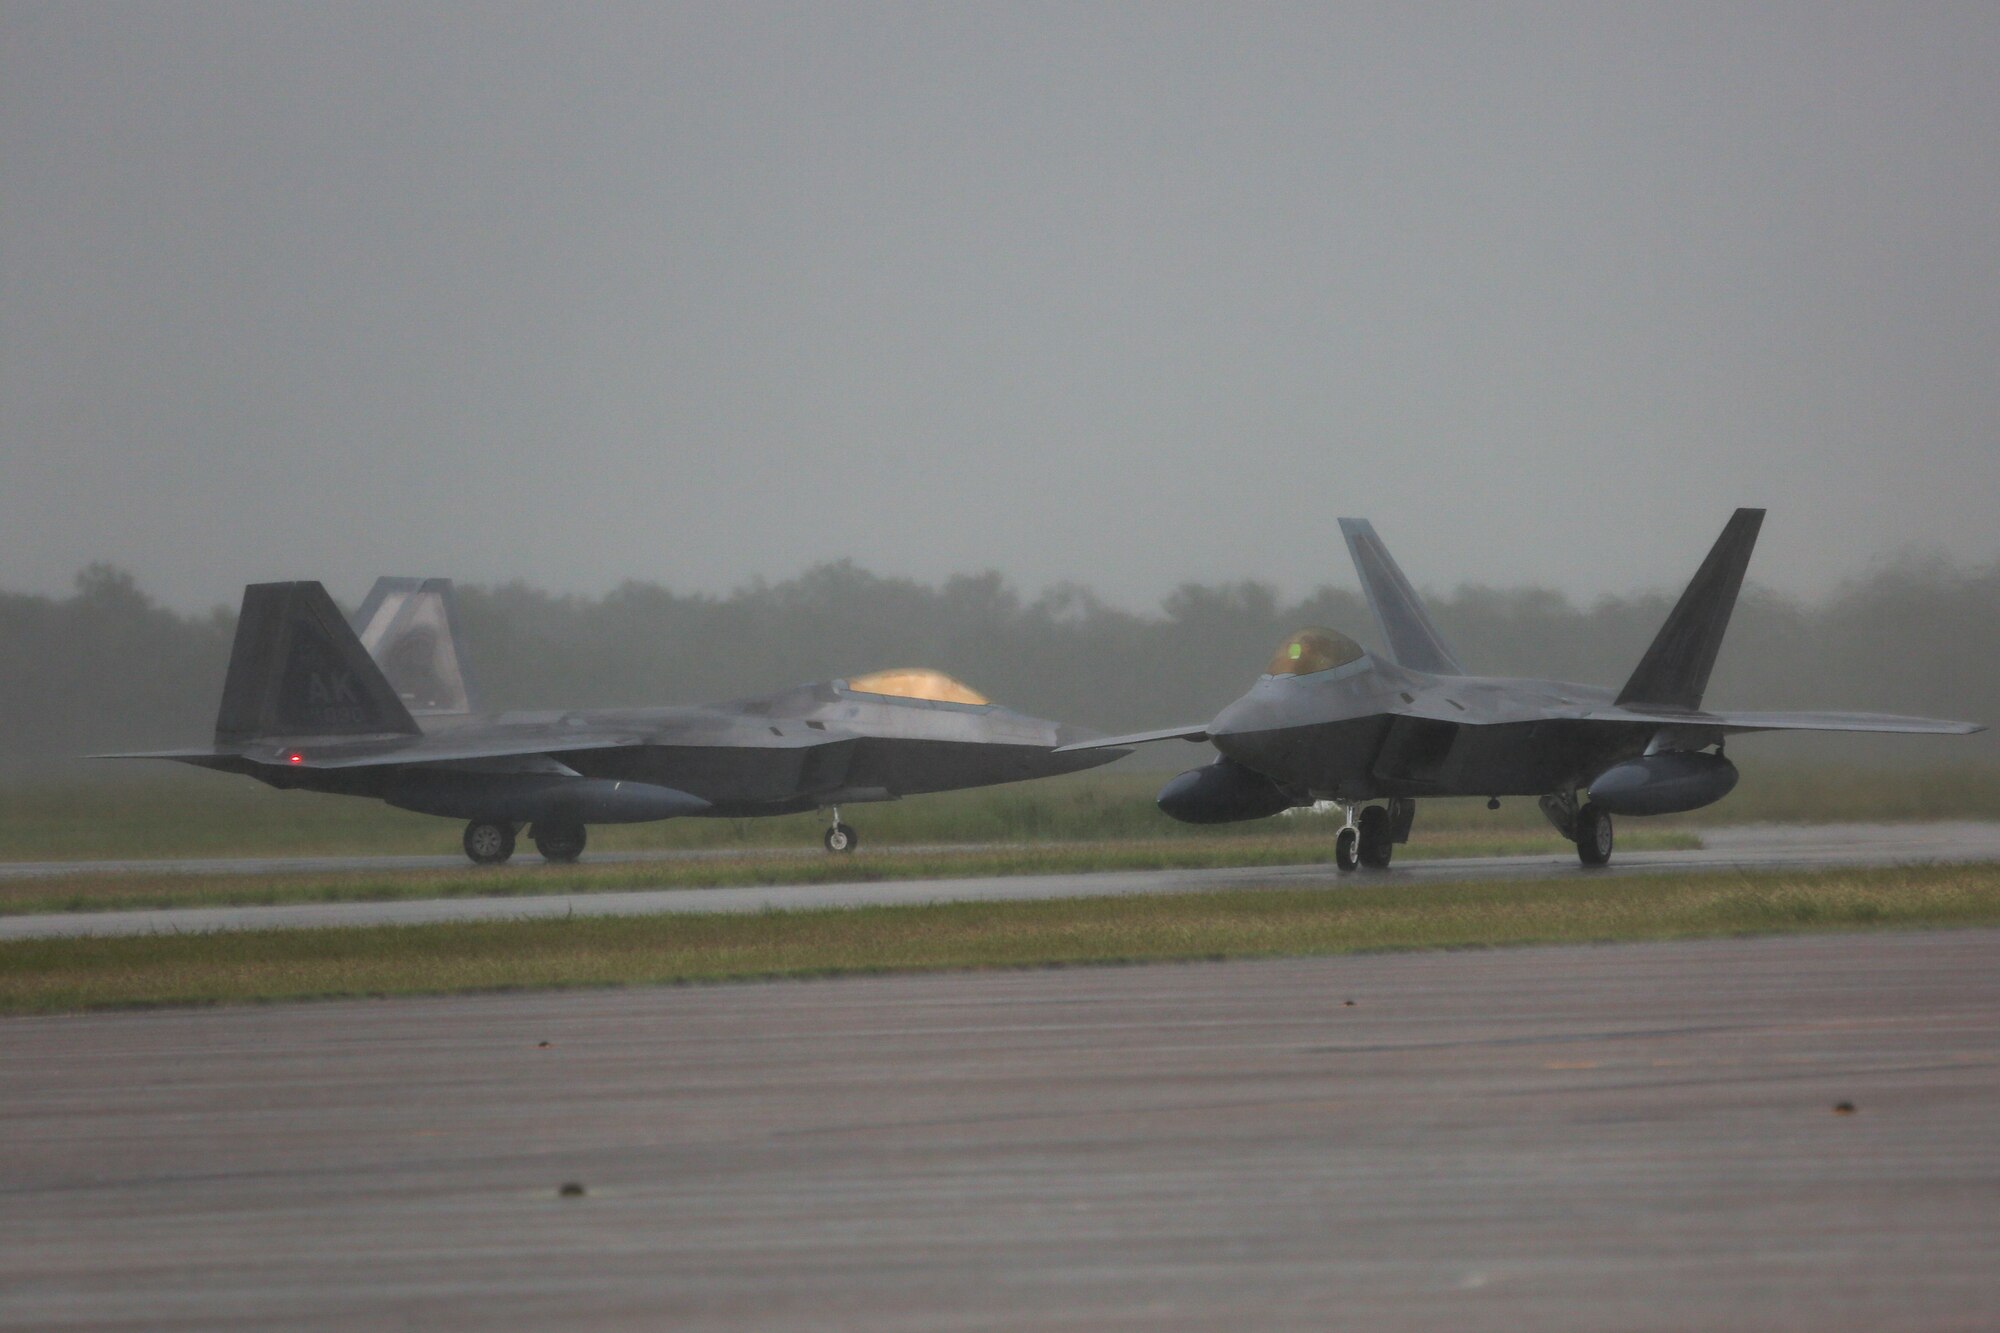 The first three of 12 U.S. Air Force F-22 Raptors arrive at Royal Australian Air Force Base Tindal, Feb. 10, 2017. The At the direction of Adm. Harry Harris Jr., U.S. Pacific Command commander, Pacific Air Forces sent the Raptors and approximately 190 Airmen from the 90th Fighter Squadron at Joint Base Elmendorf-Richardson, Alaska, to conduct combined exercises and training missions with the RAAF as part of the Enhanced Air Cooperation Initiative under the Force Posture Agreement between the United States and Australia.
